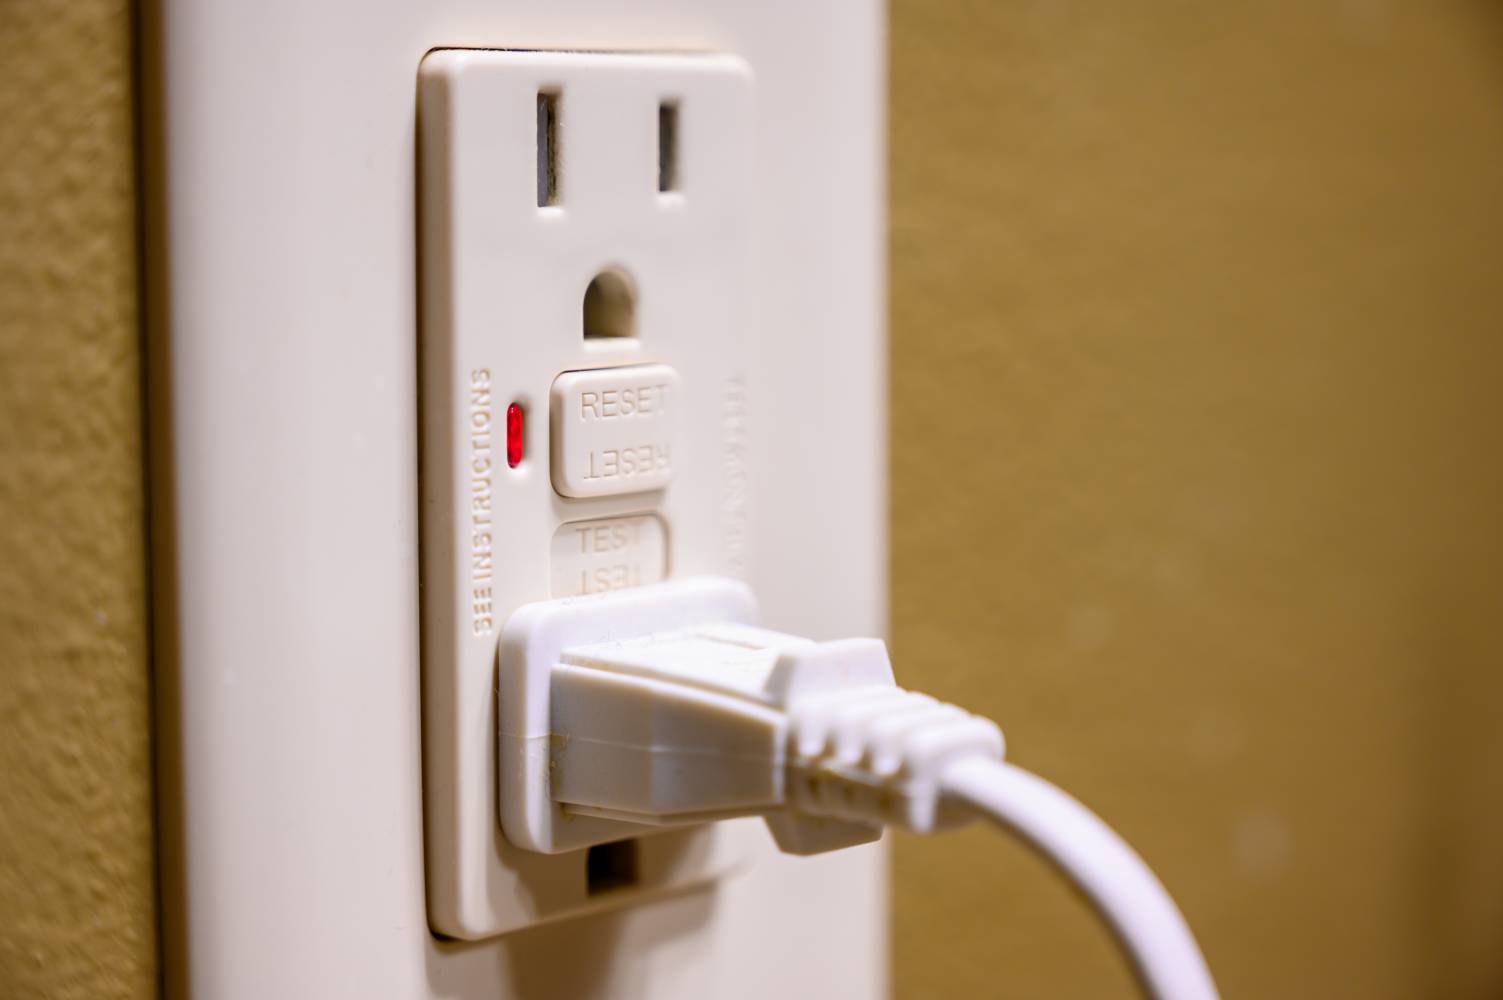 Image of GFCI outlet tripped state